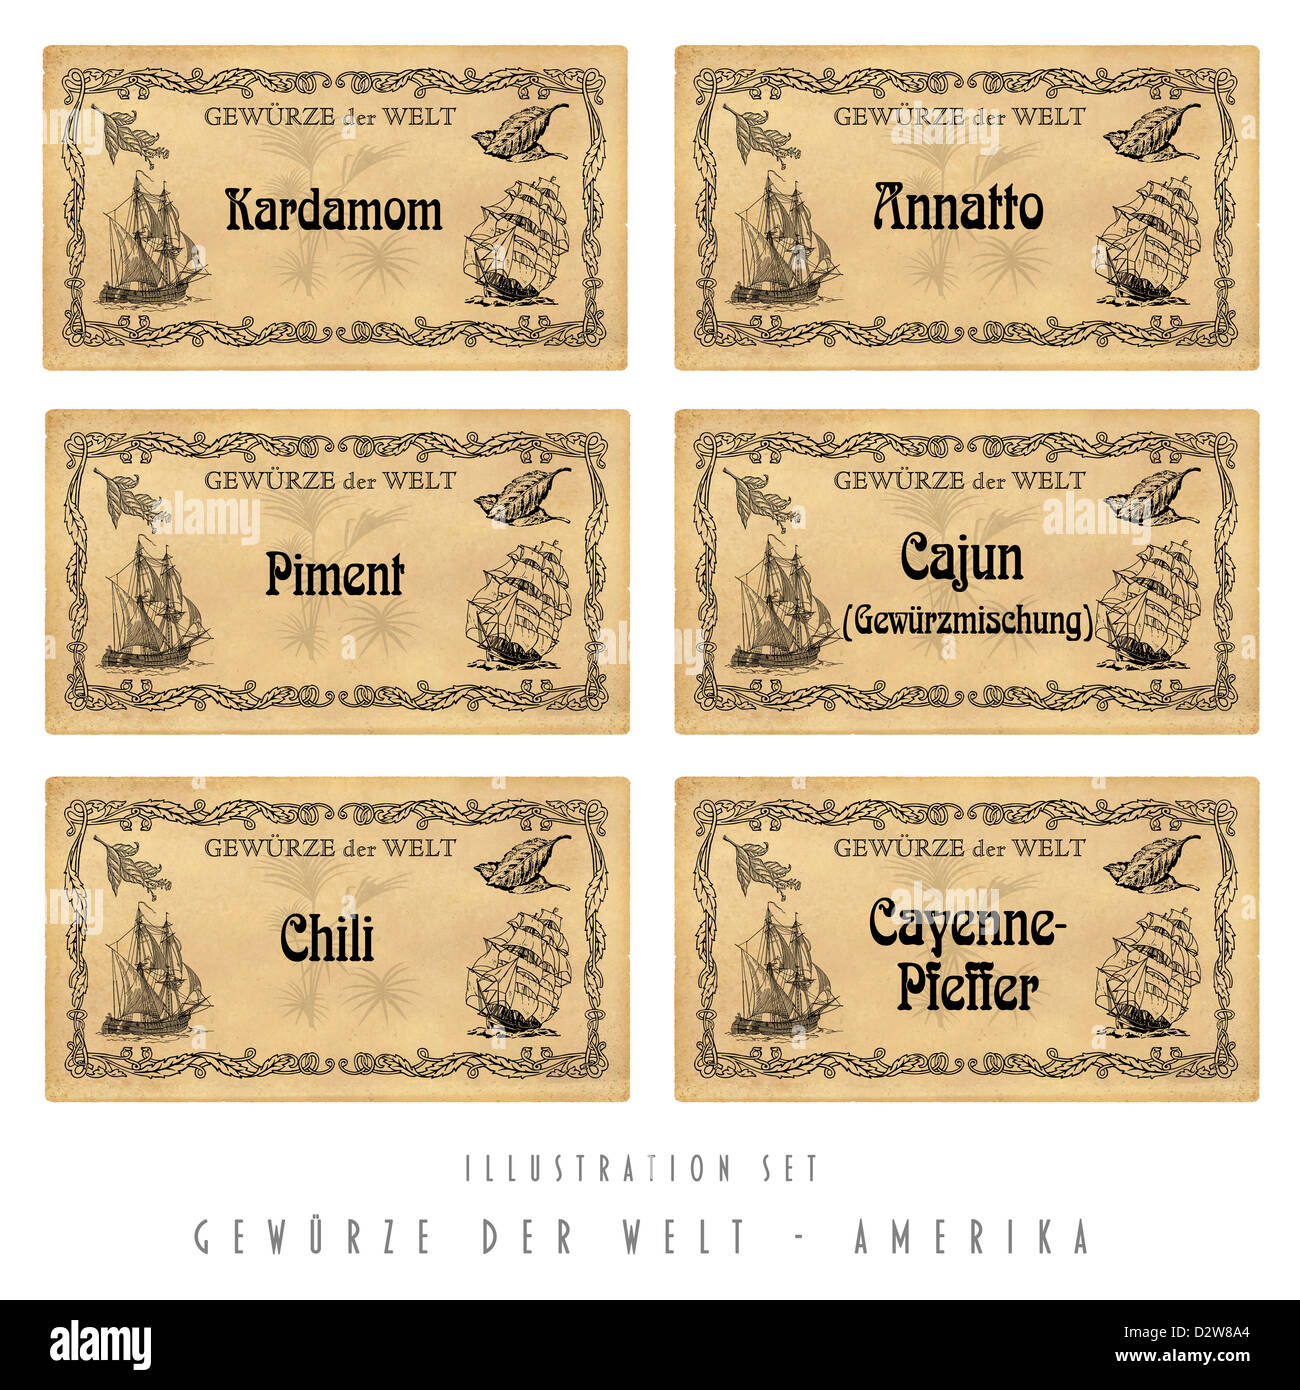 Illustration set with six spice labels, America Stock Photo